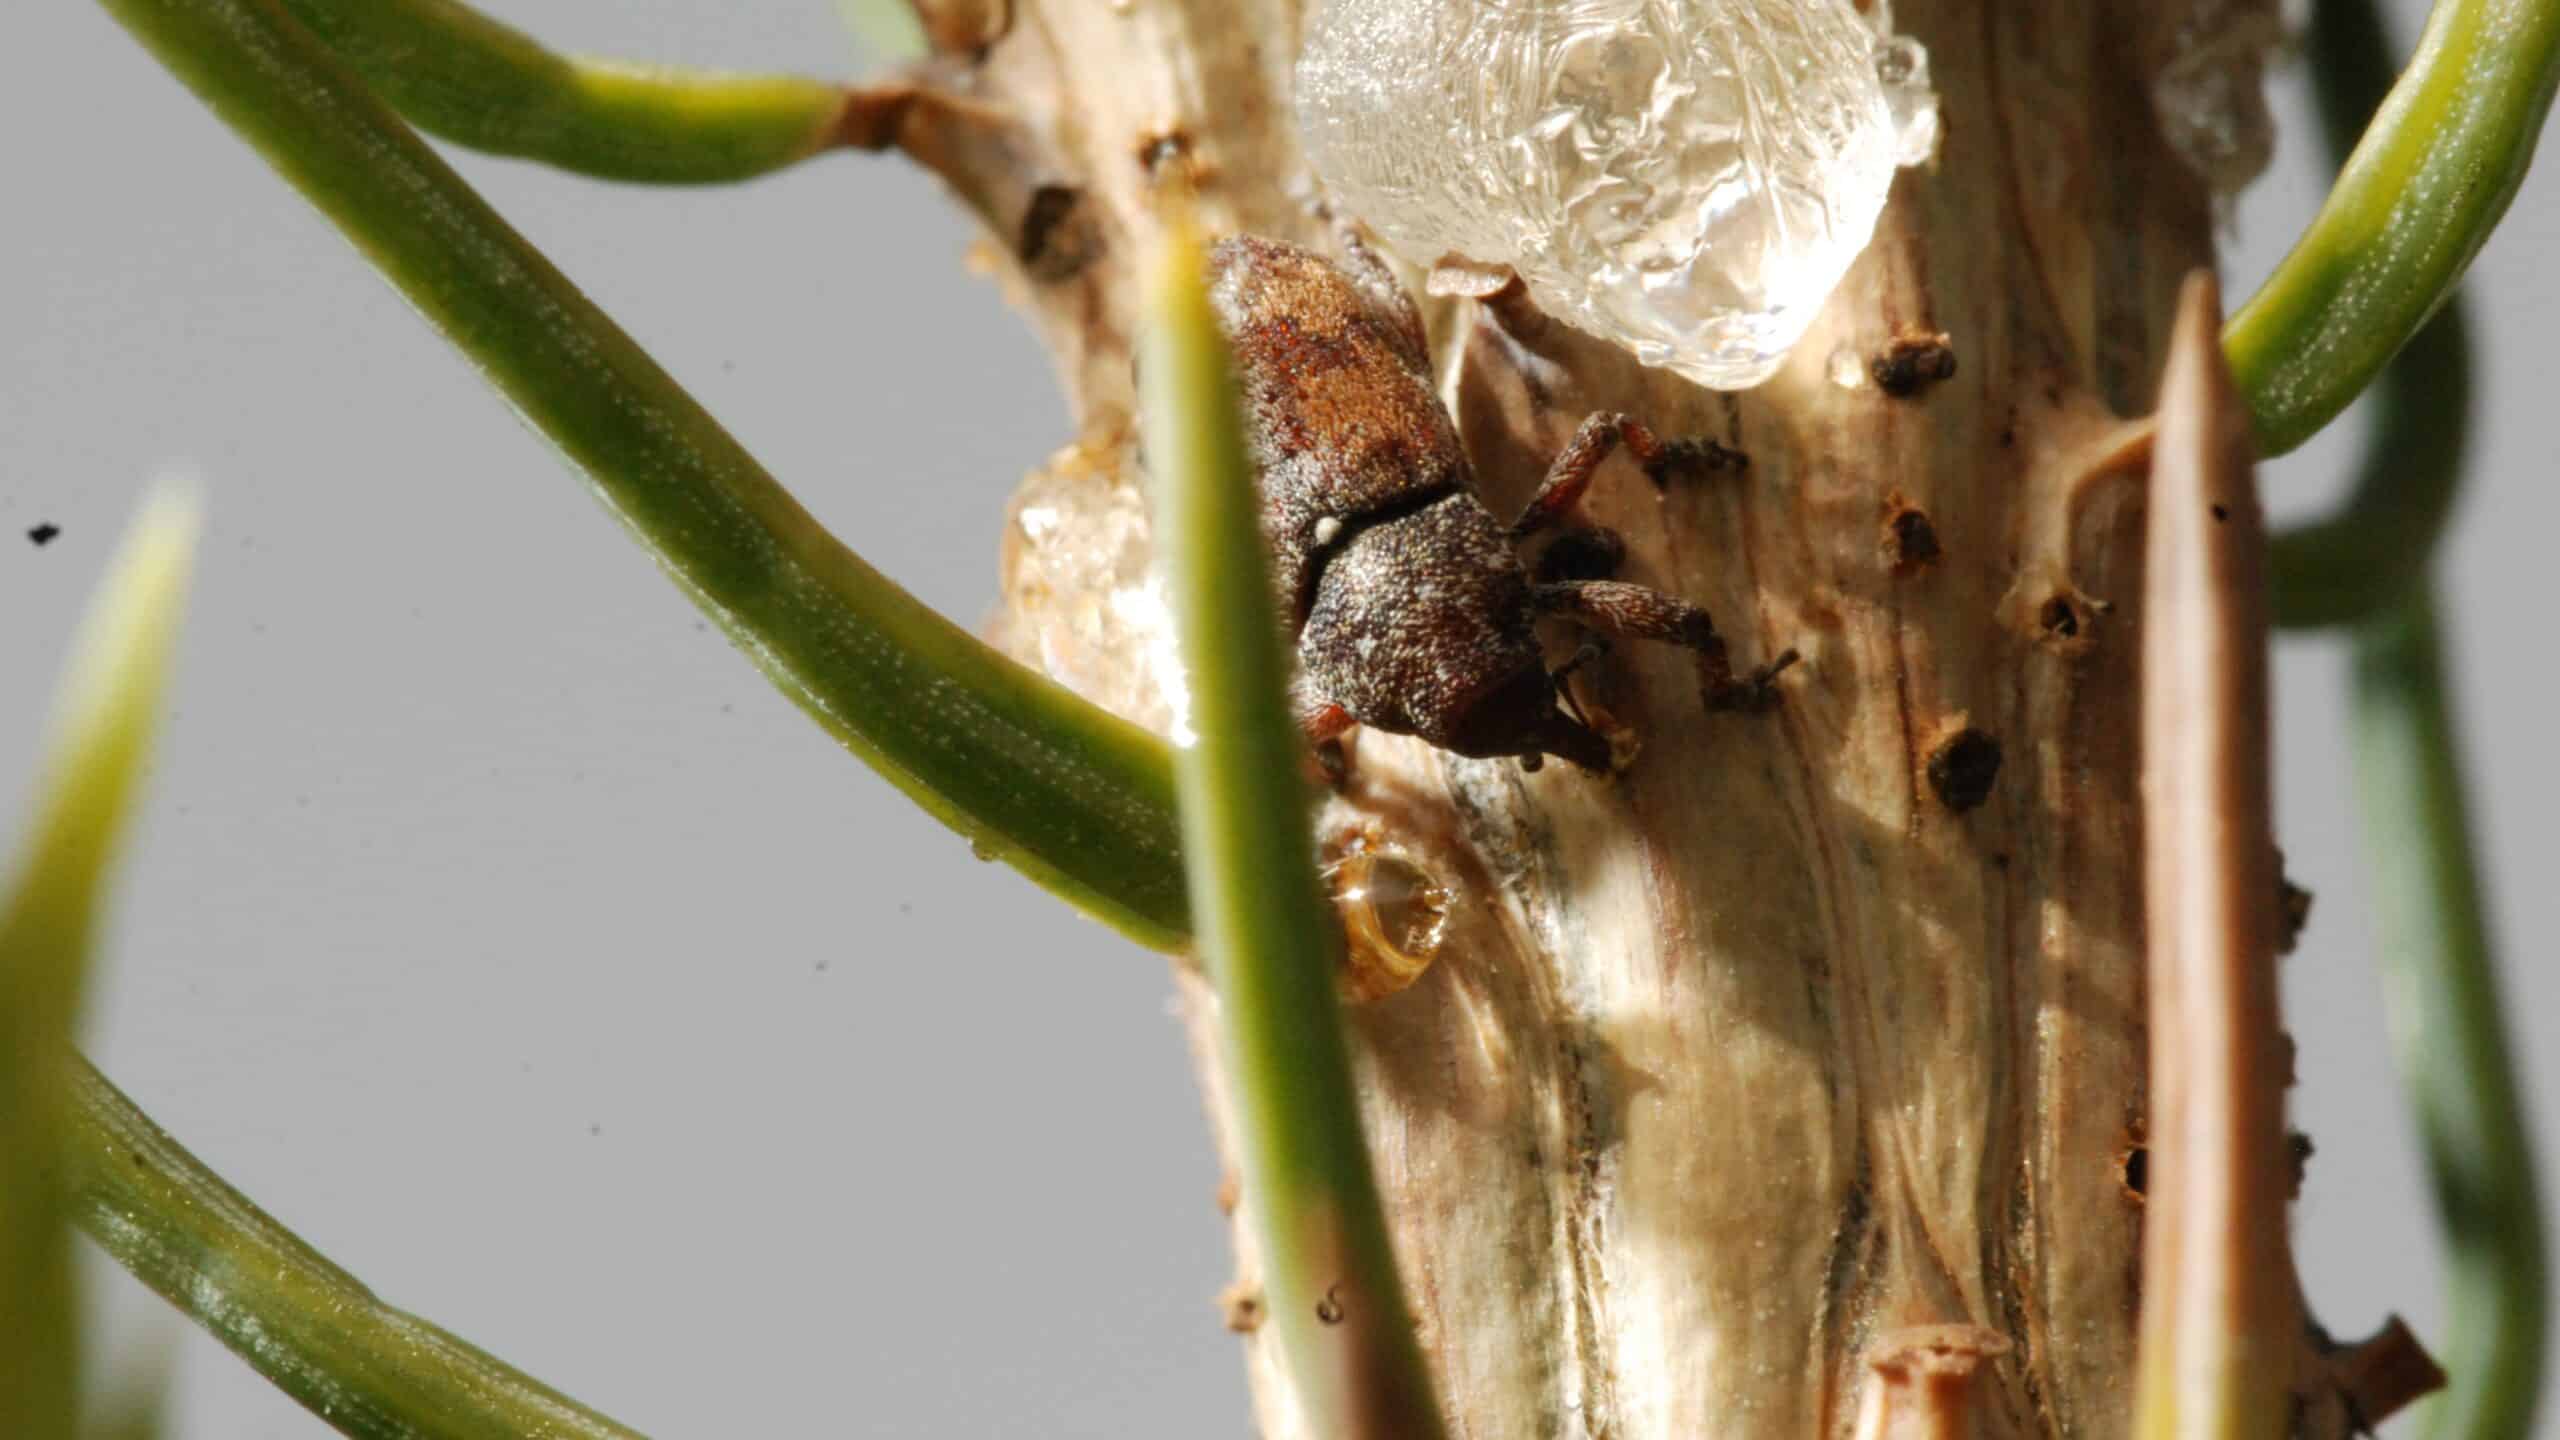 Spruce weevil - Study Reveals How a Tall Spruce Develops Defense Against Hungry Weevils - College of Natural Resources at NC State University